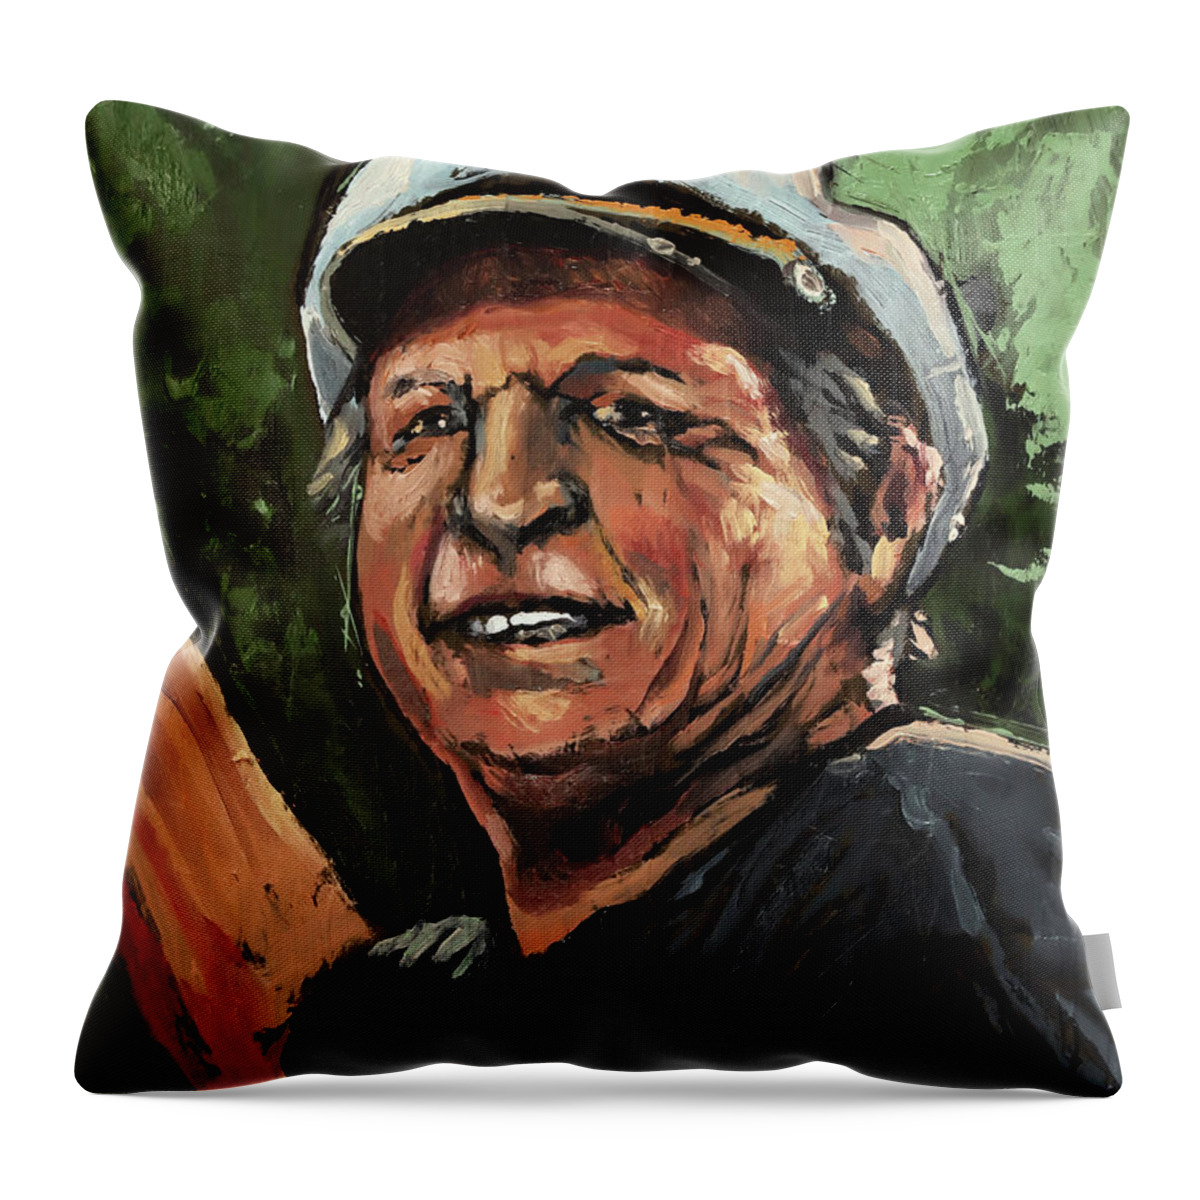 Captain Throw Pillow featuring the painting The Captain by Sv Bell